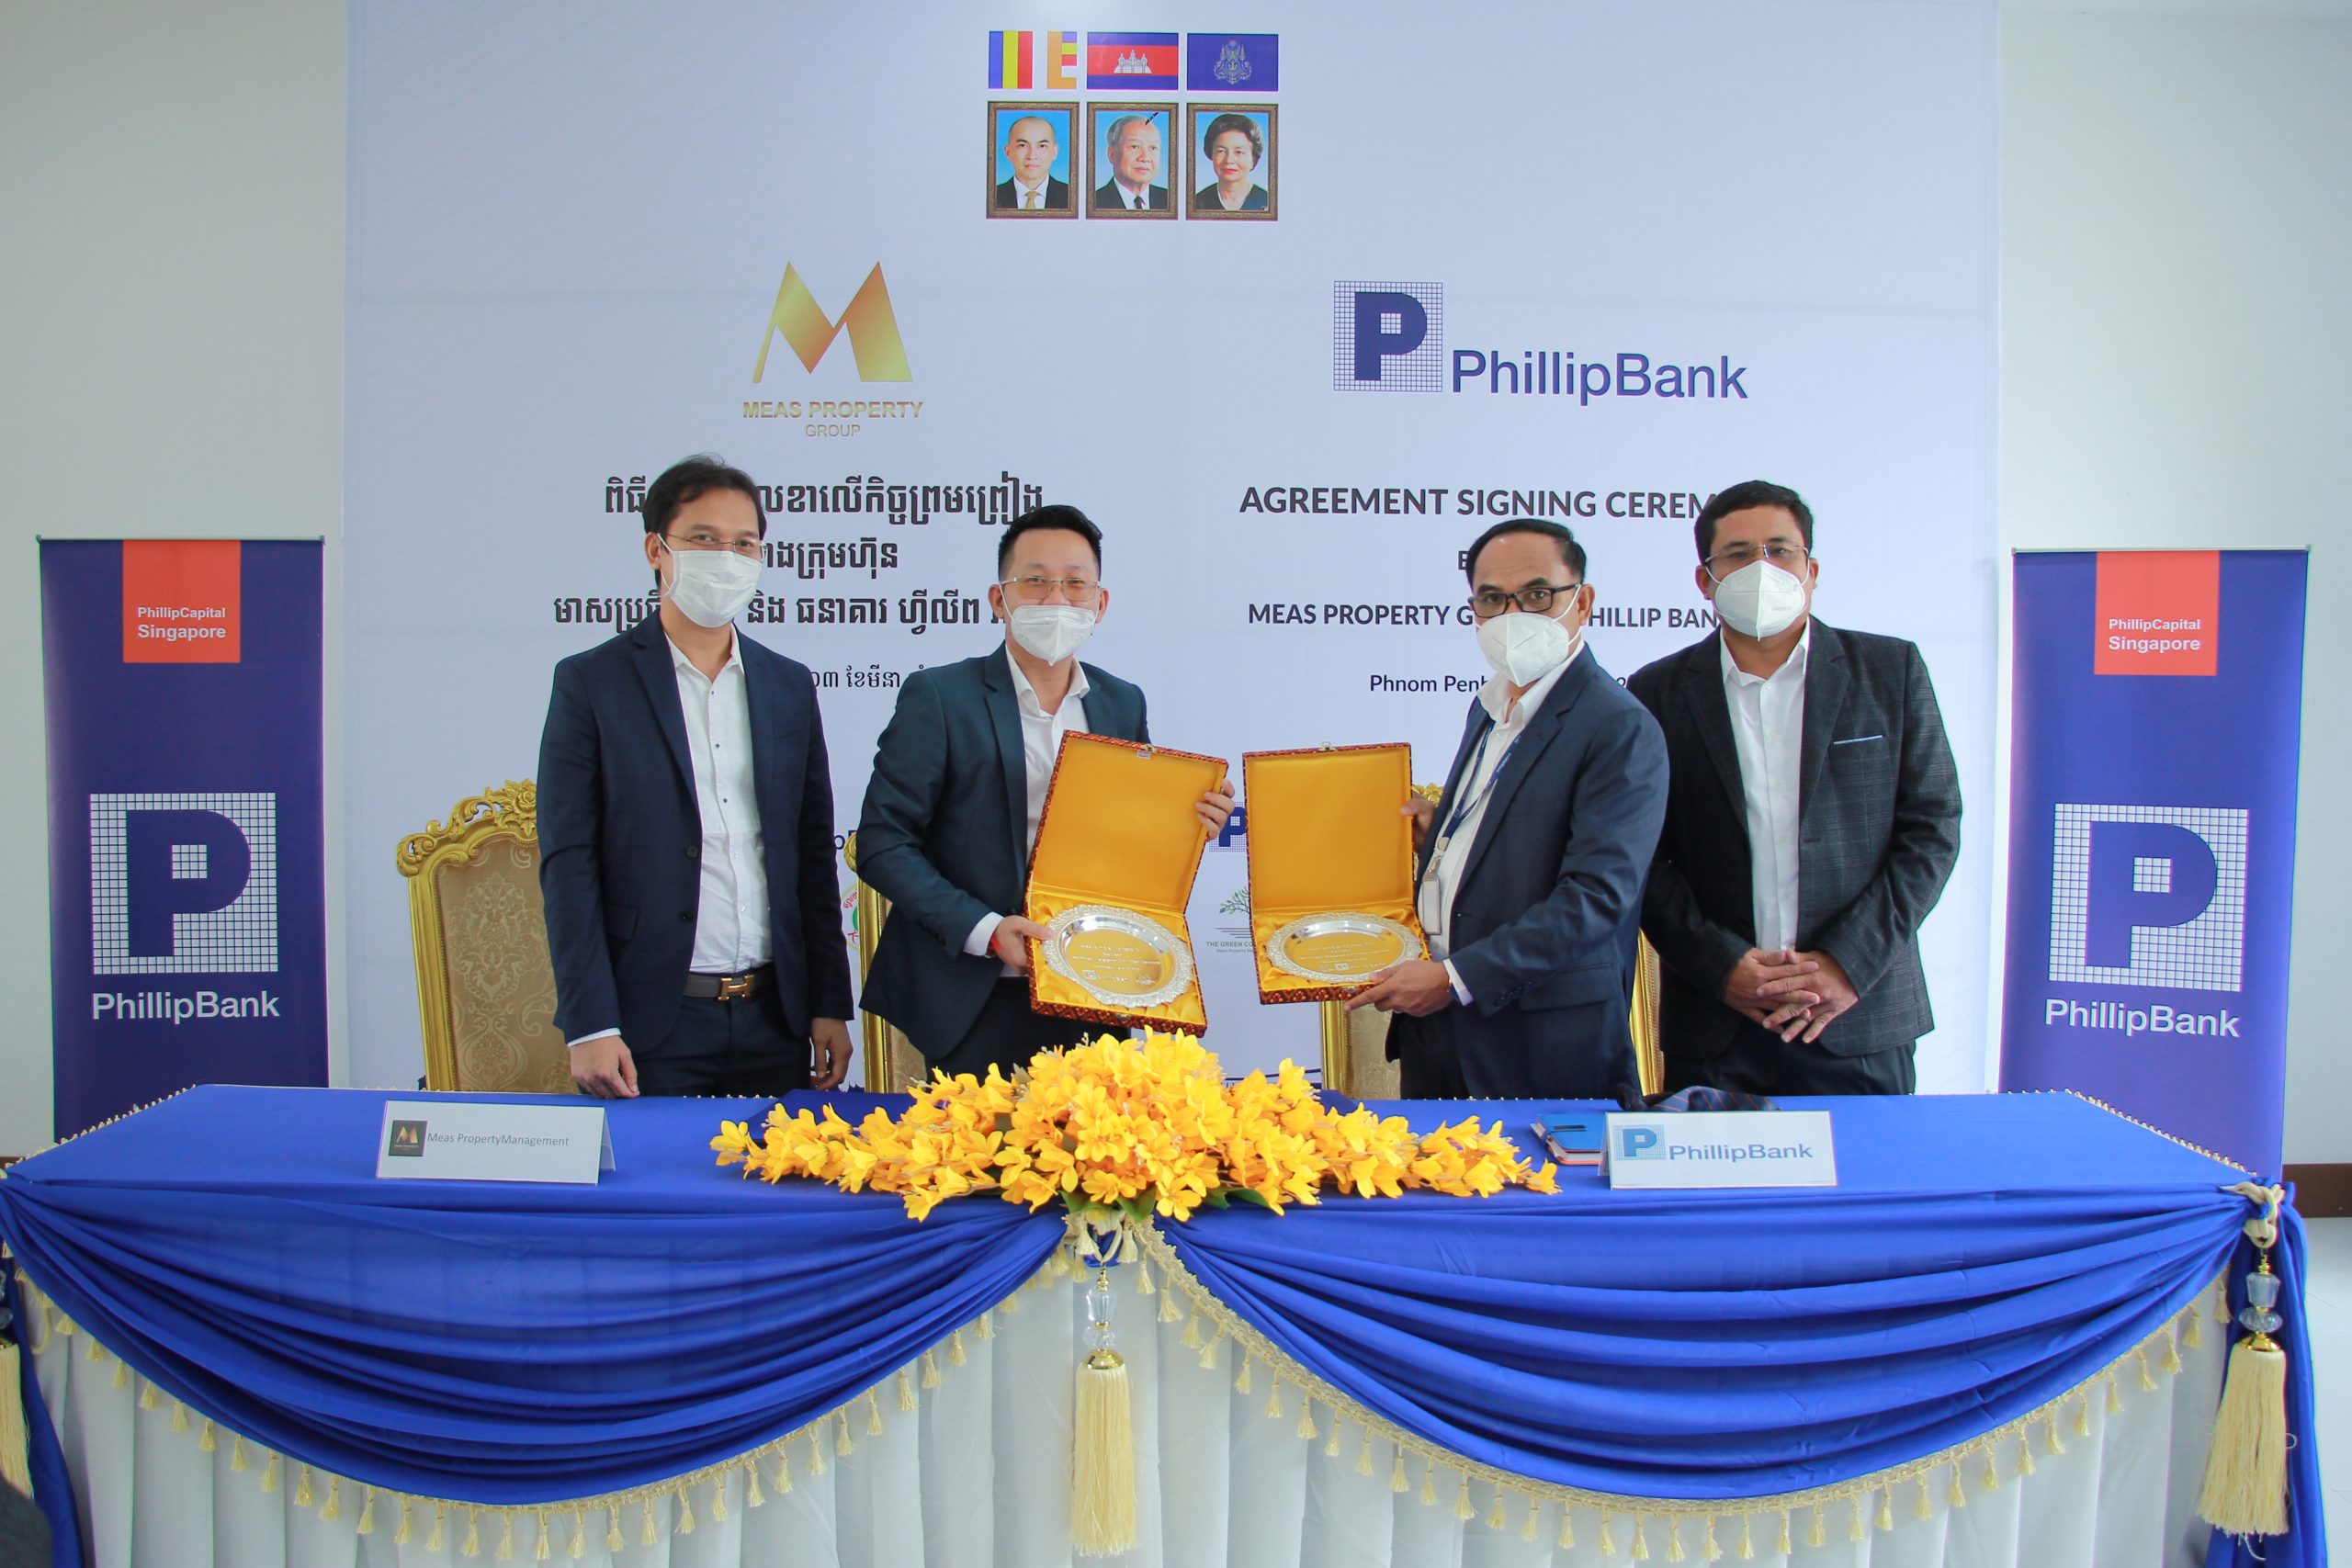 Phillip Bank and Meas Property Group sign MoU on credit service